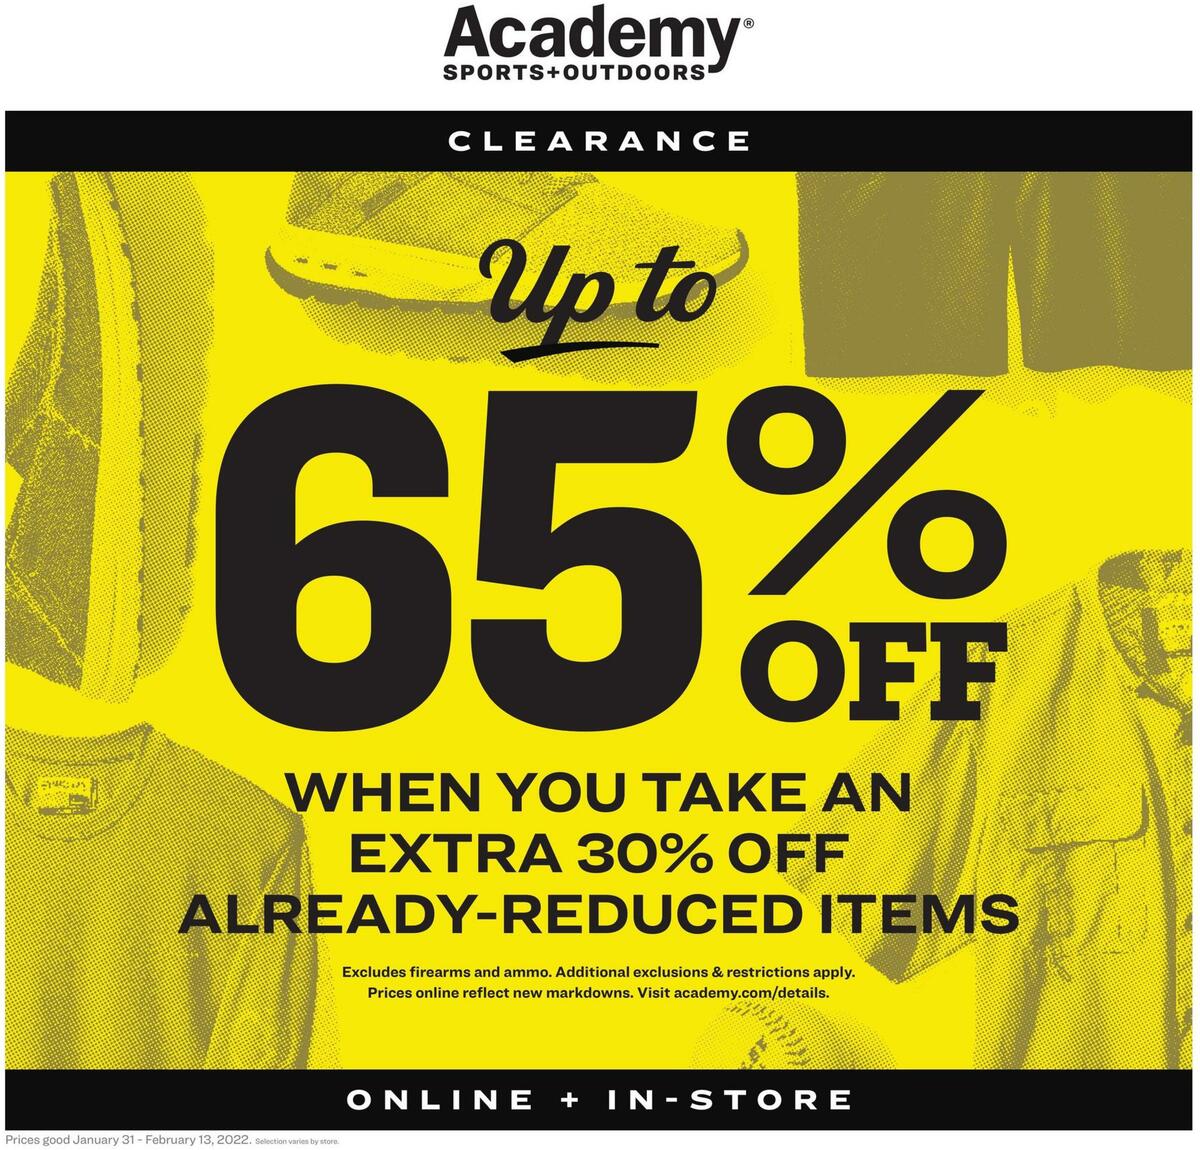 academy-sports-outdoors-weekly-ads-and-circulars-from-january-31